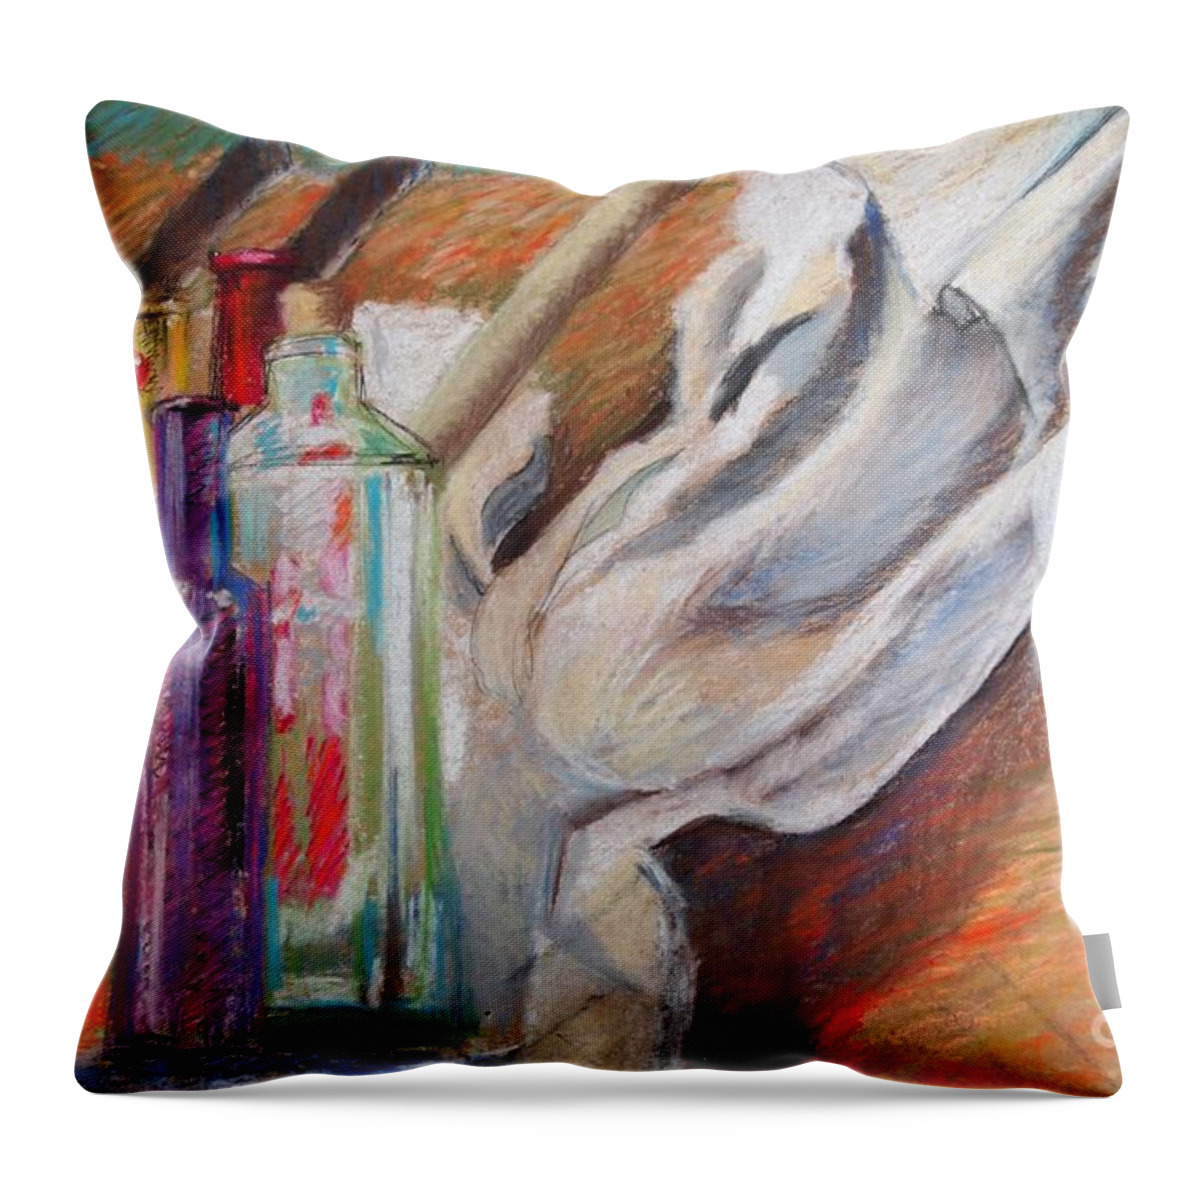 Pastel Still Life Throw Pillow featuring the pastel Still Life by Nancy Kane Chapman